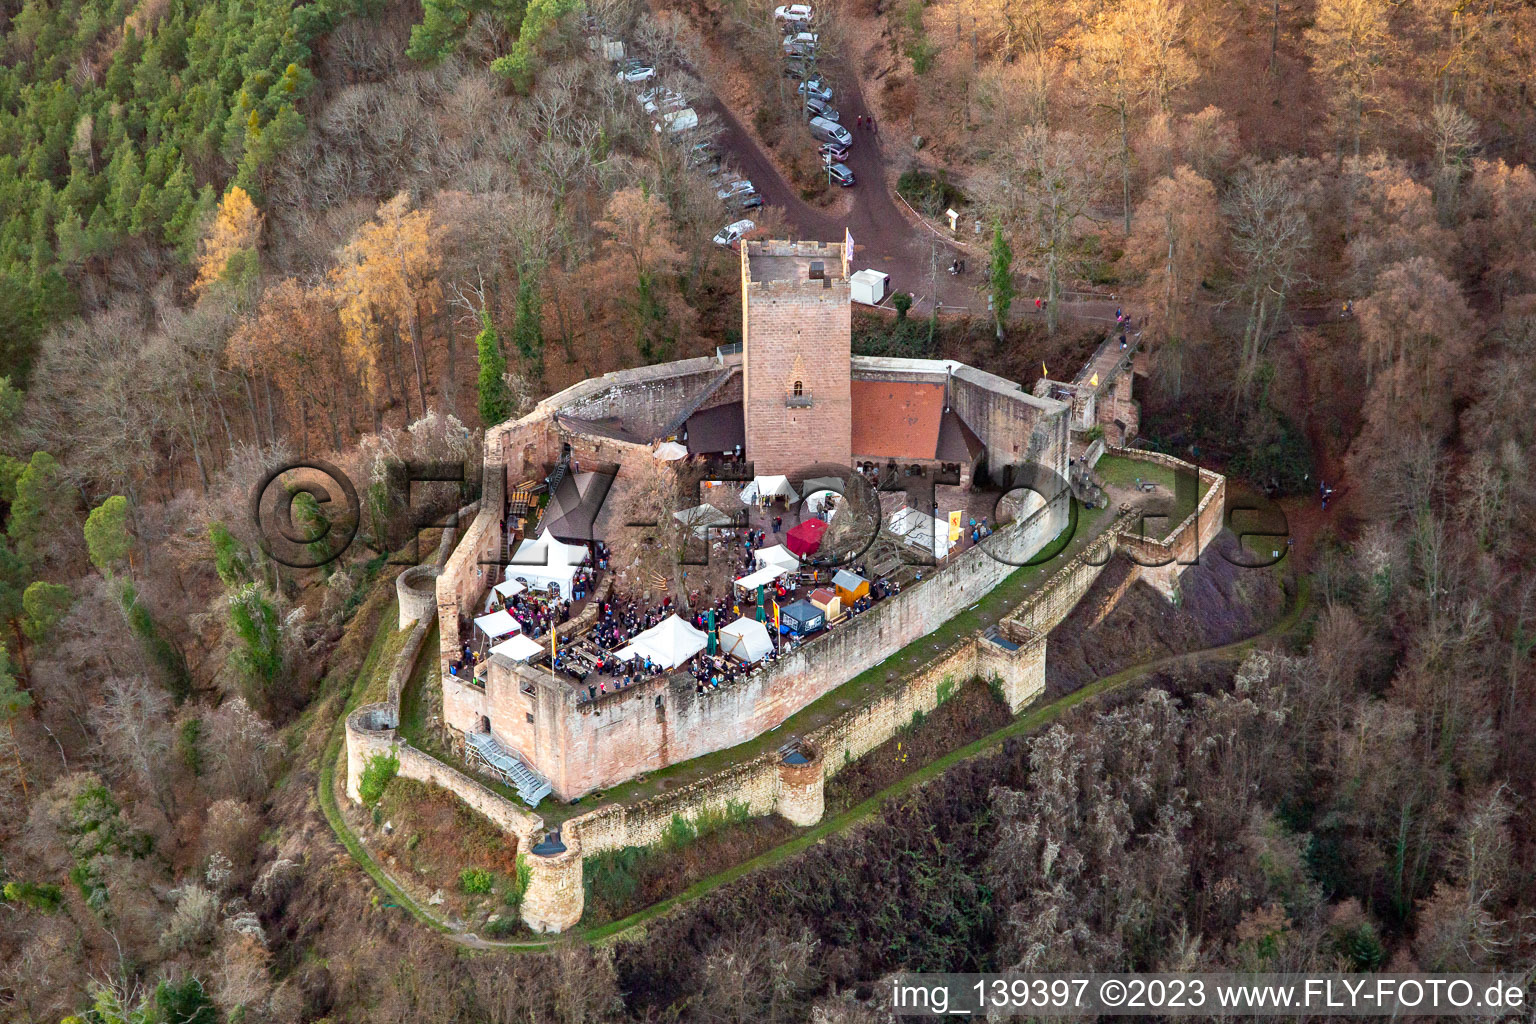 Oblique view of Christmas market at the Landeck castle ruins in Klingenmünster in the state Rhineland-Palatinate, Germany